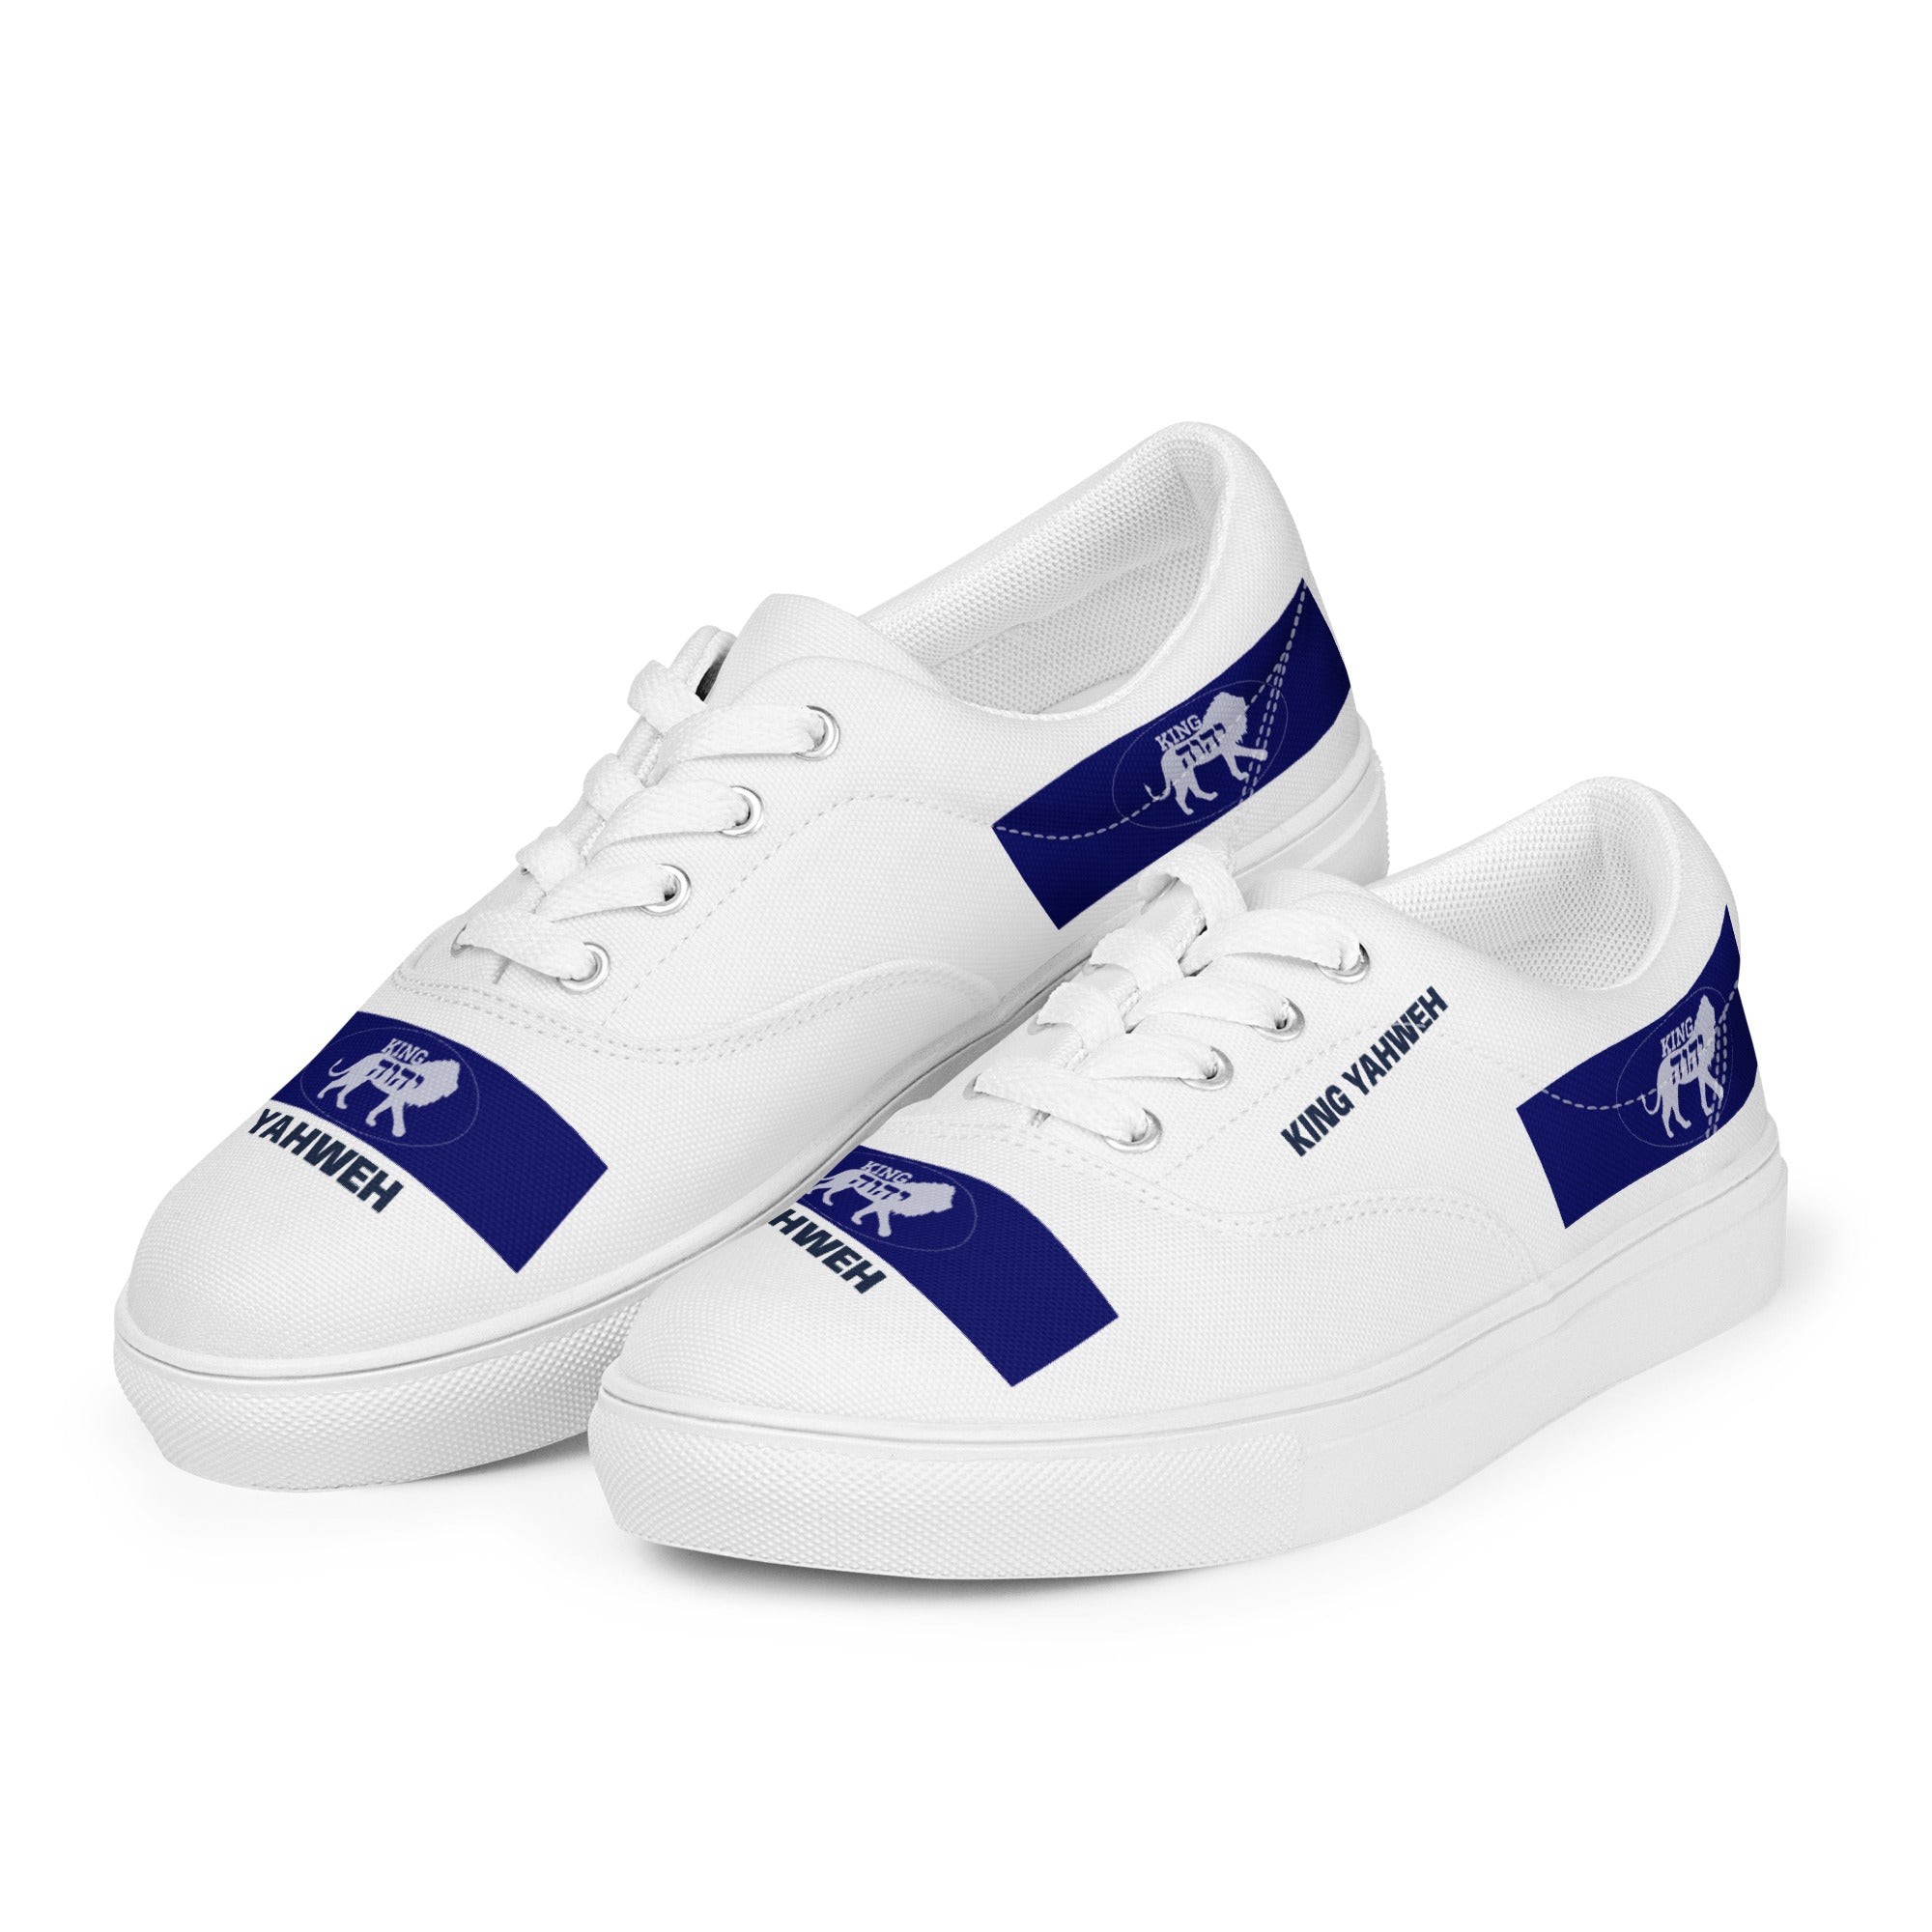 King YAHWEH (COZIES) Women’s lace-up canvas shoes